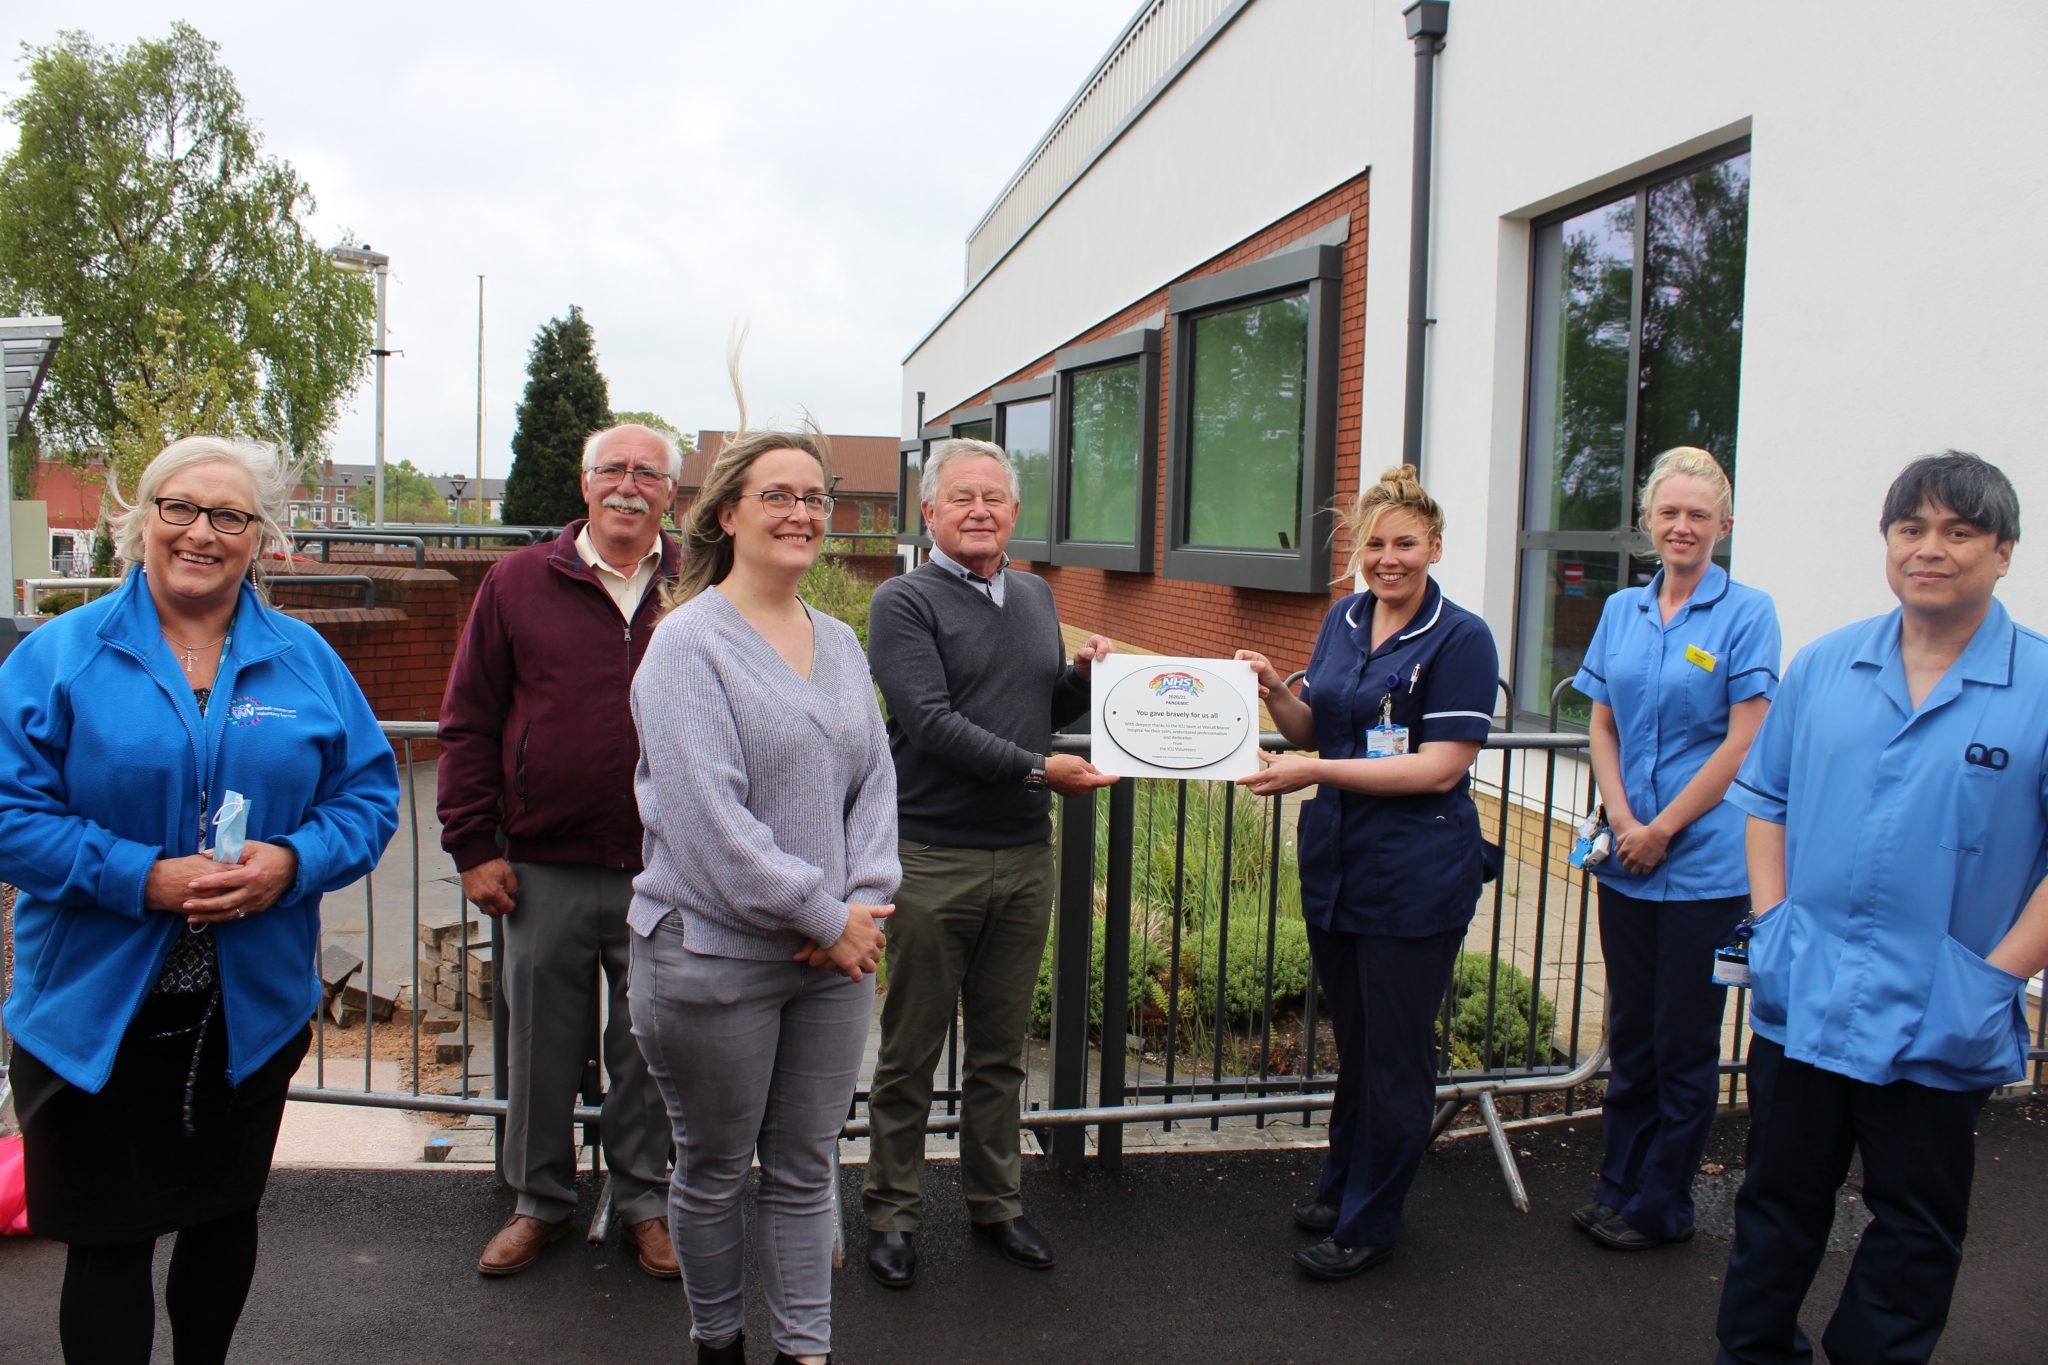 Volunteers hand over the special plaque to critical care staff